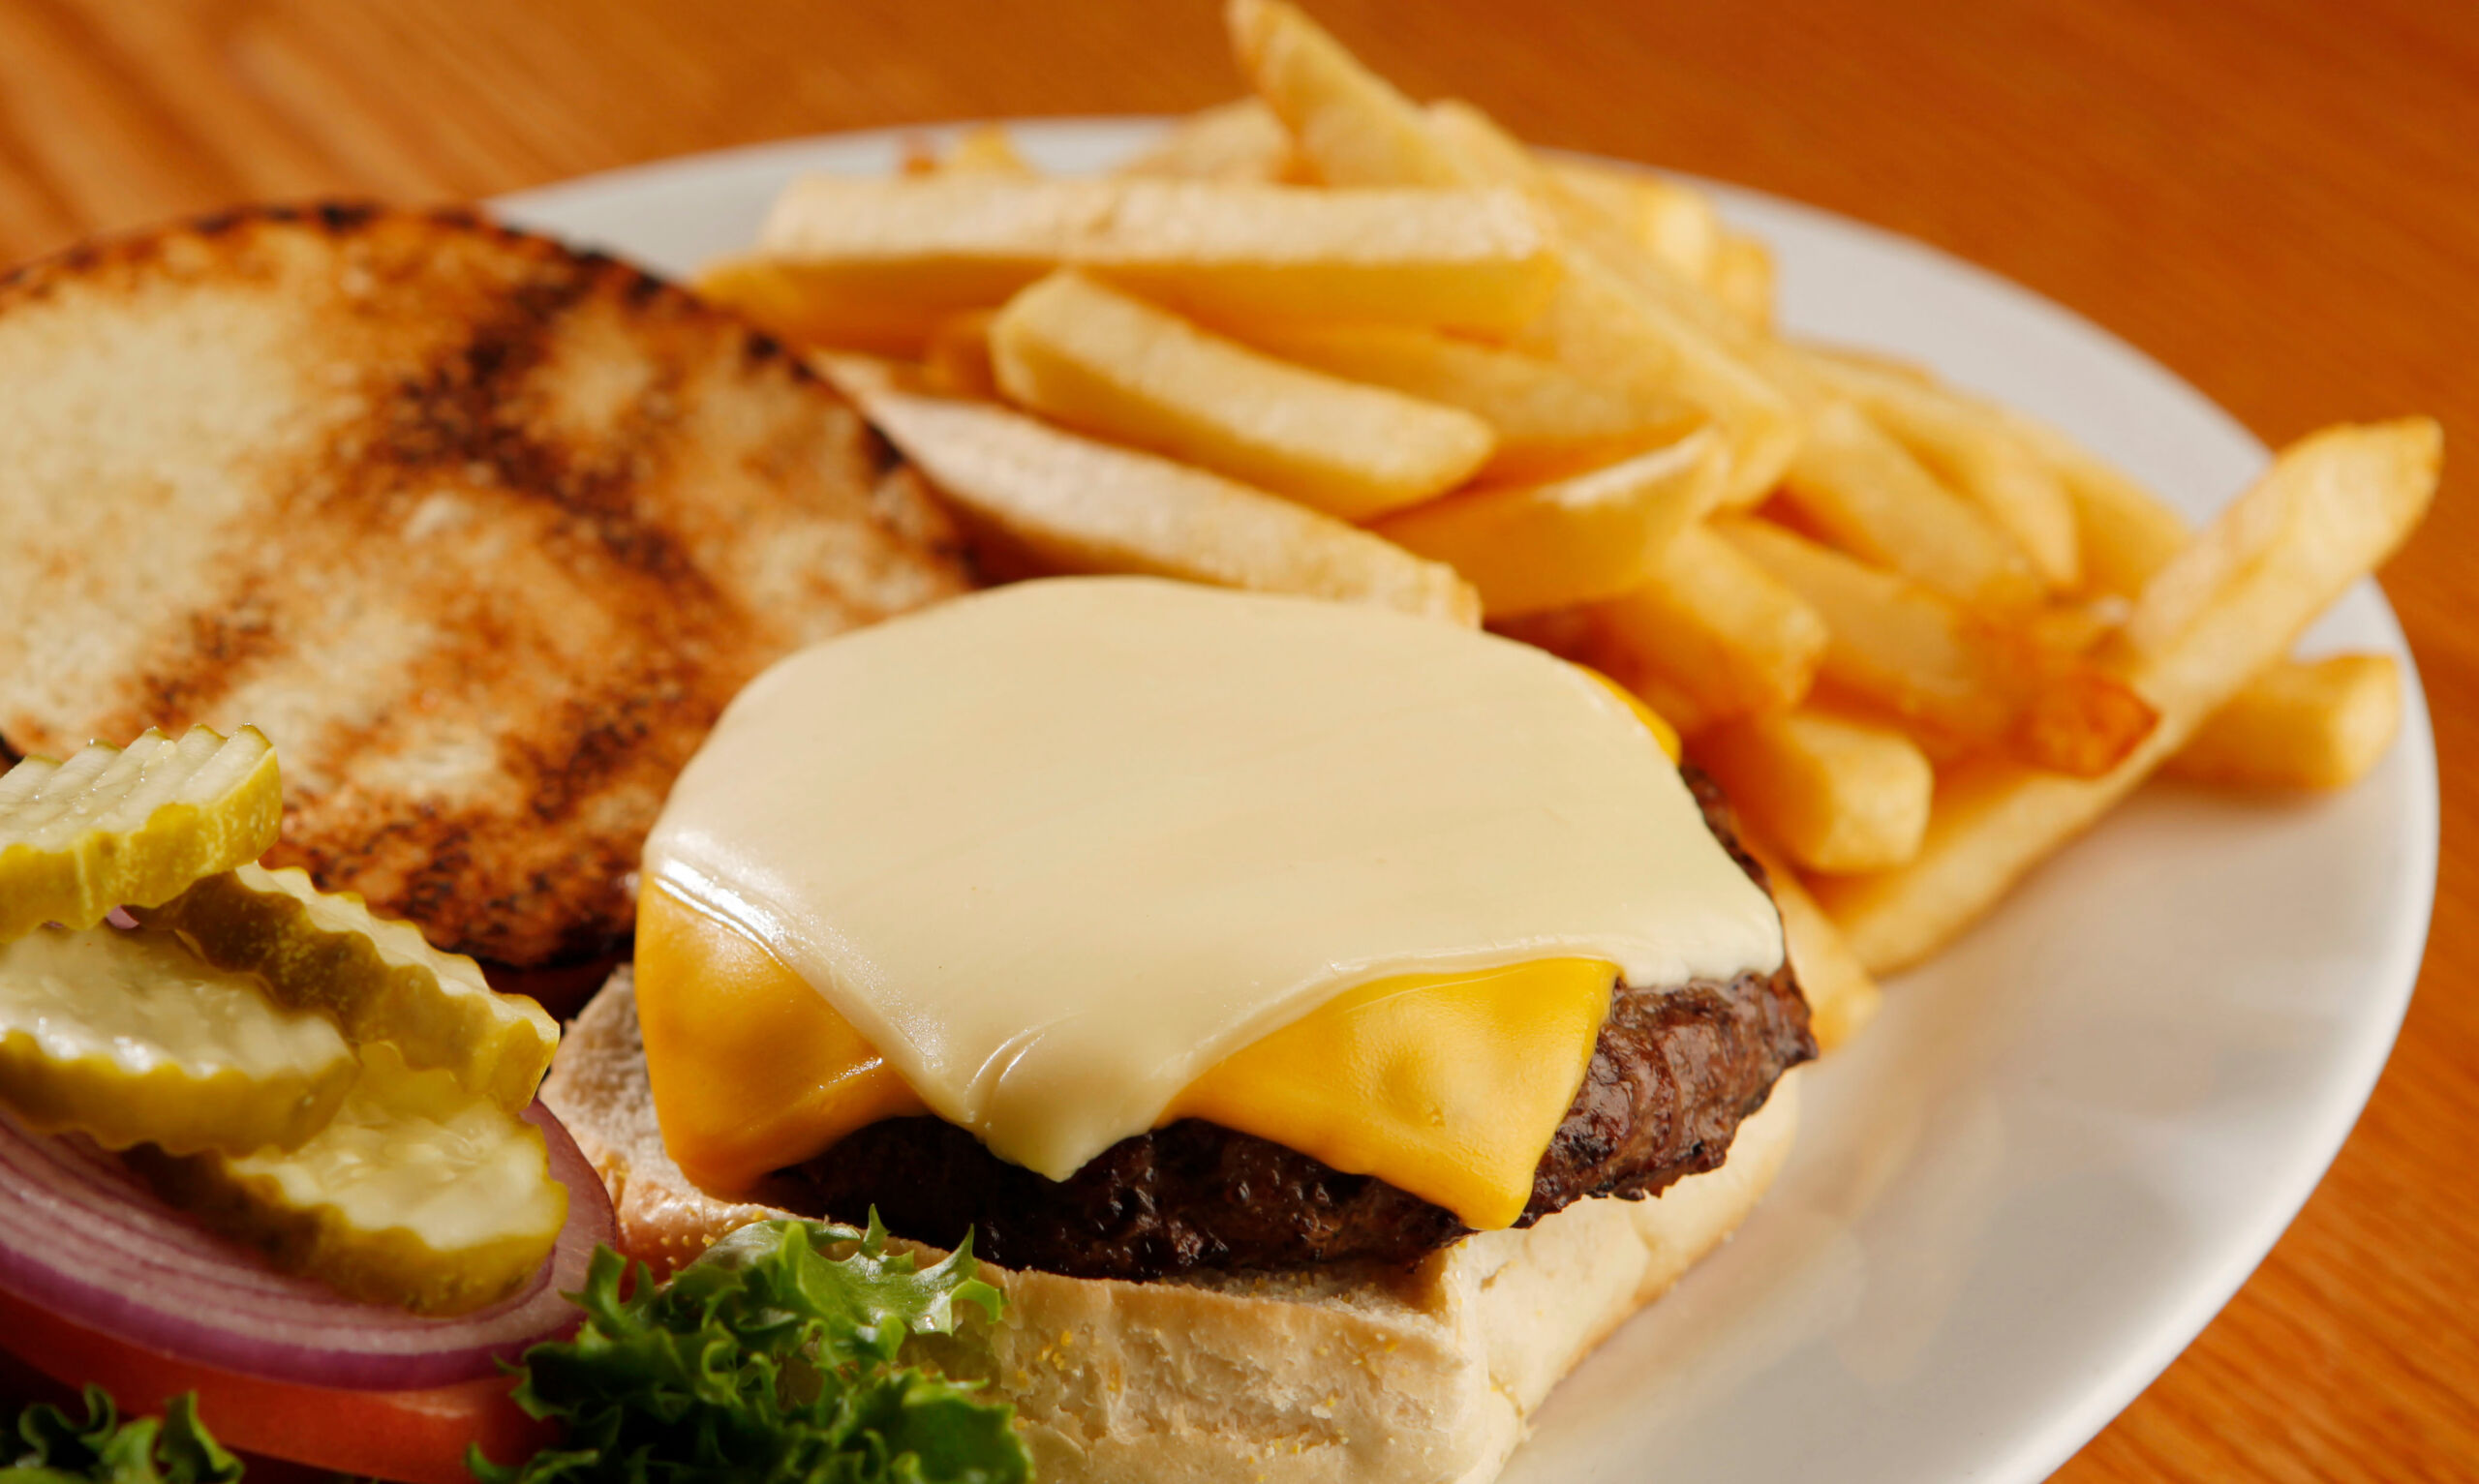 Cheeseburger with French fries